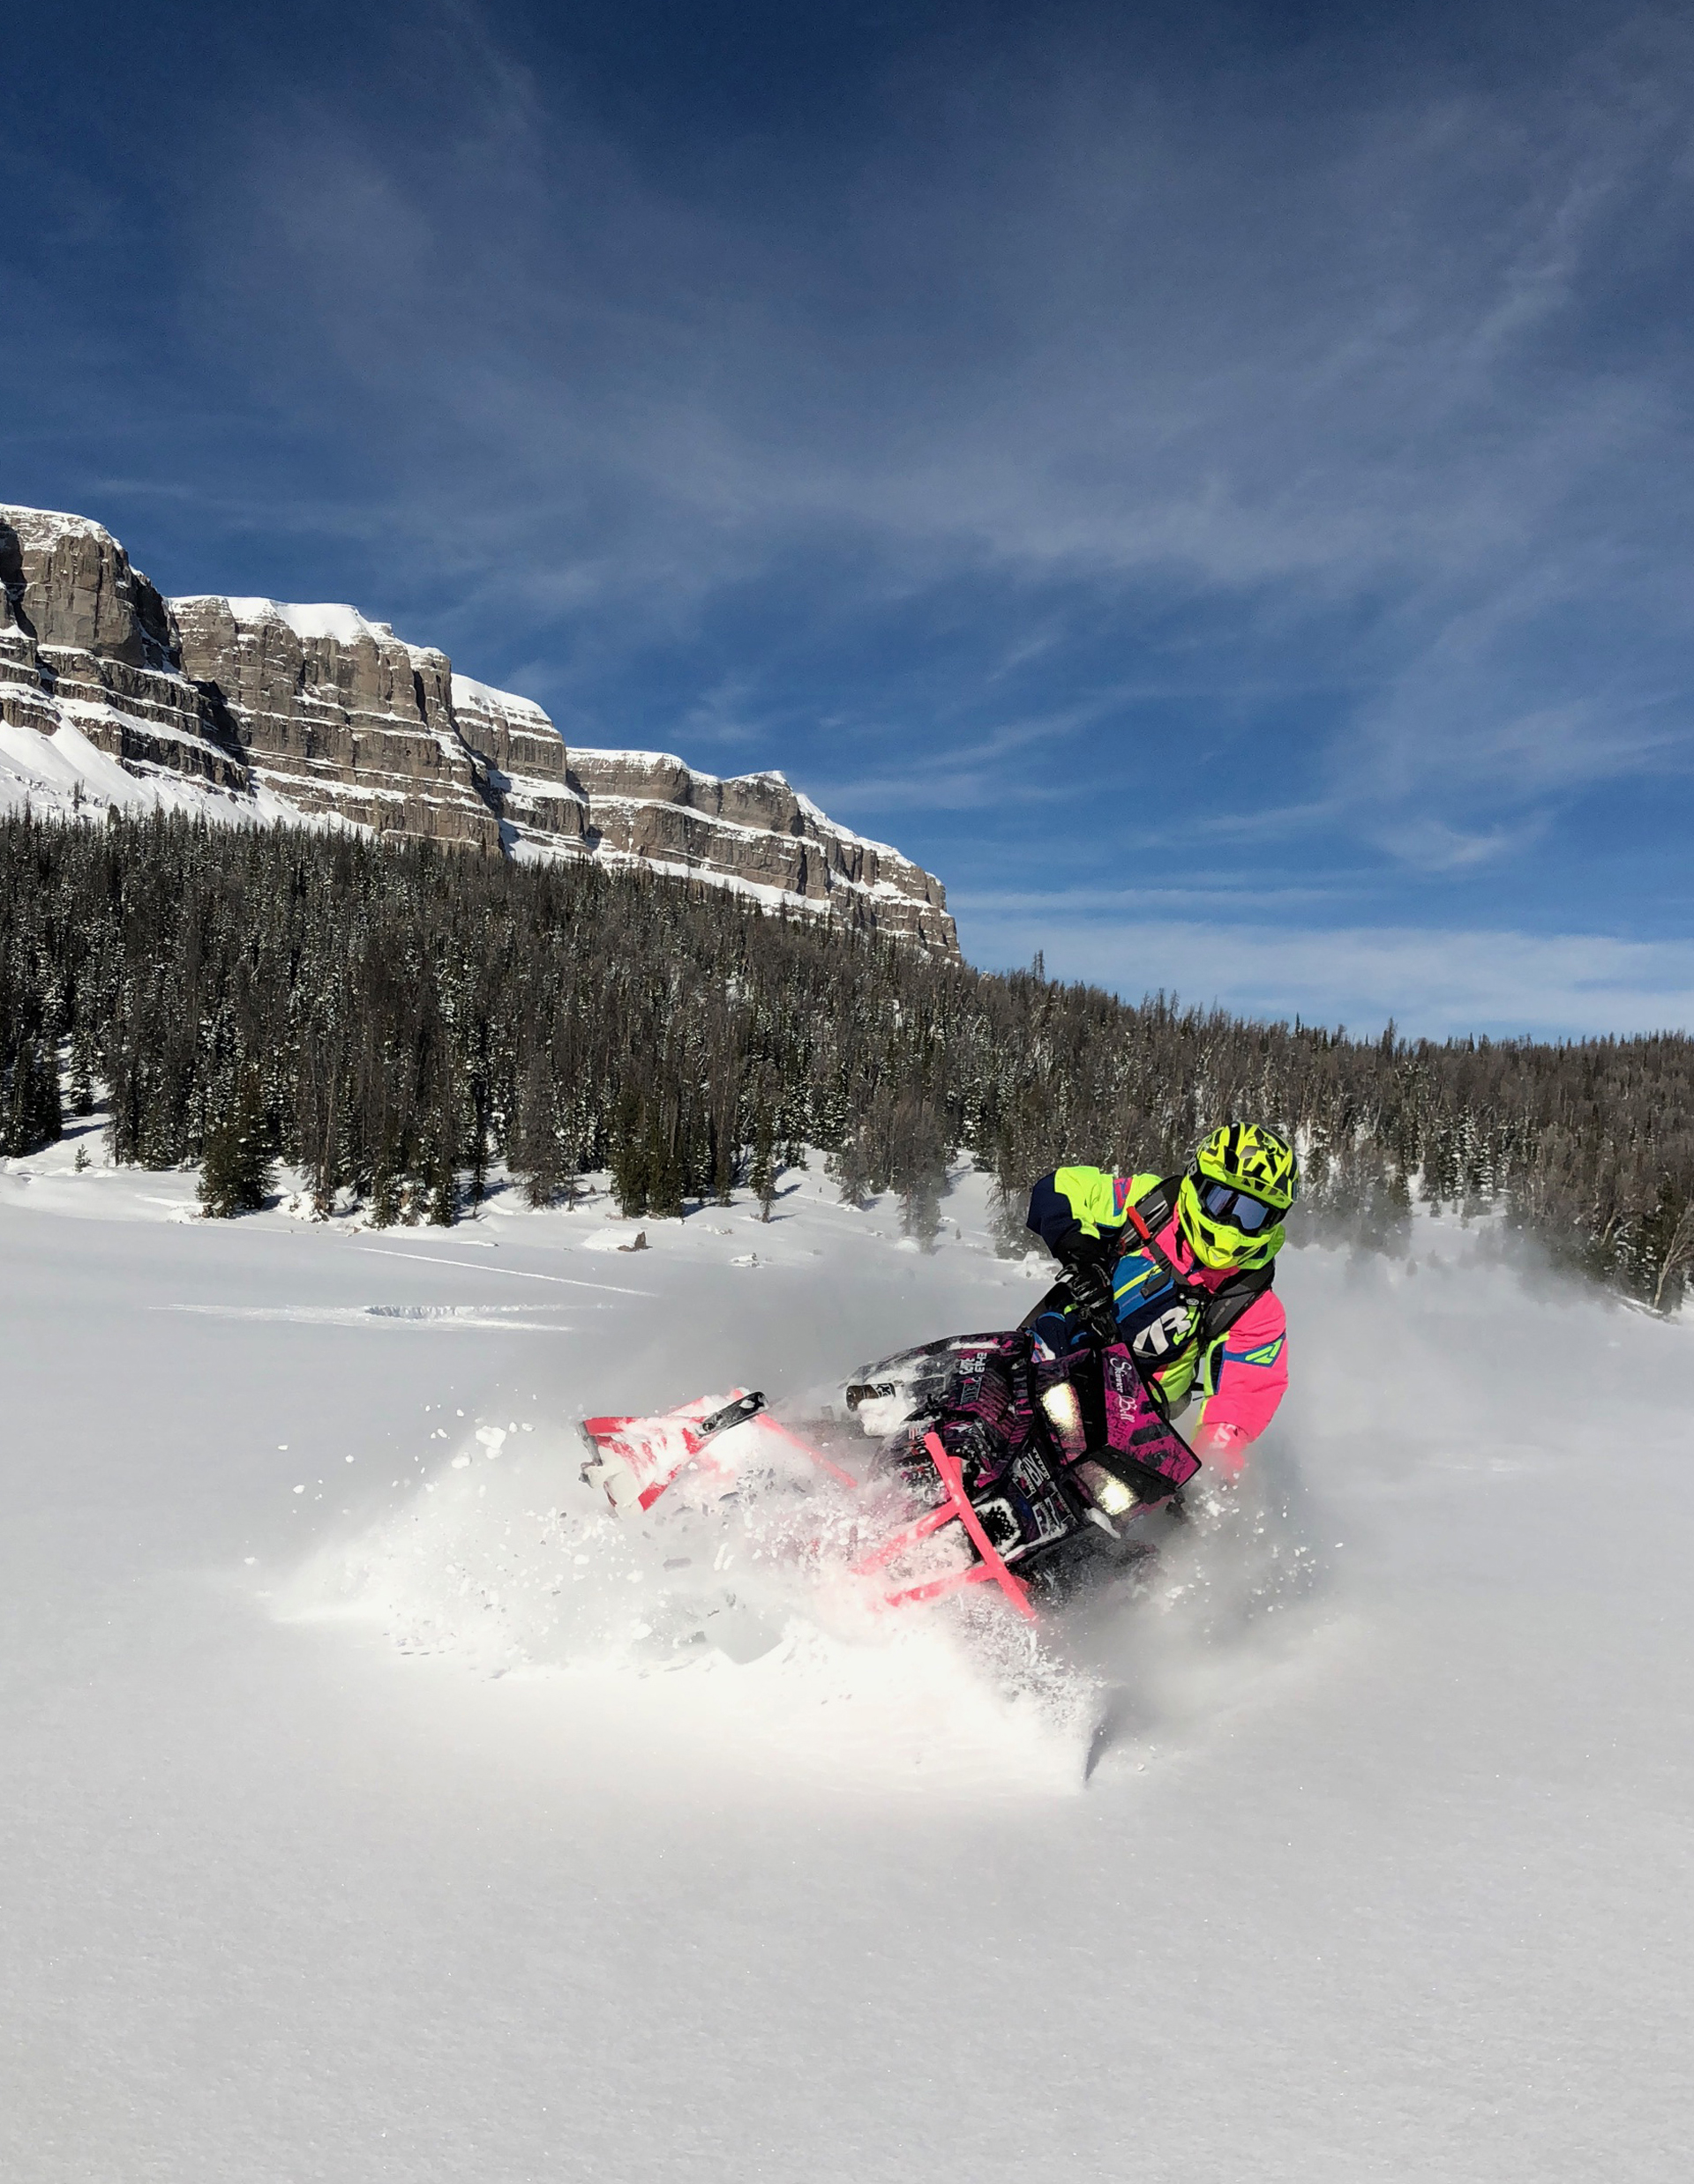 A bucket-list destination for snowmobilers, Brooks Lake Lodge boasts 2 million acres of scenic, snowy terrain for riders to explore.